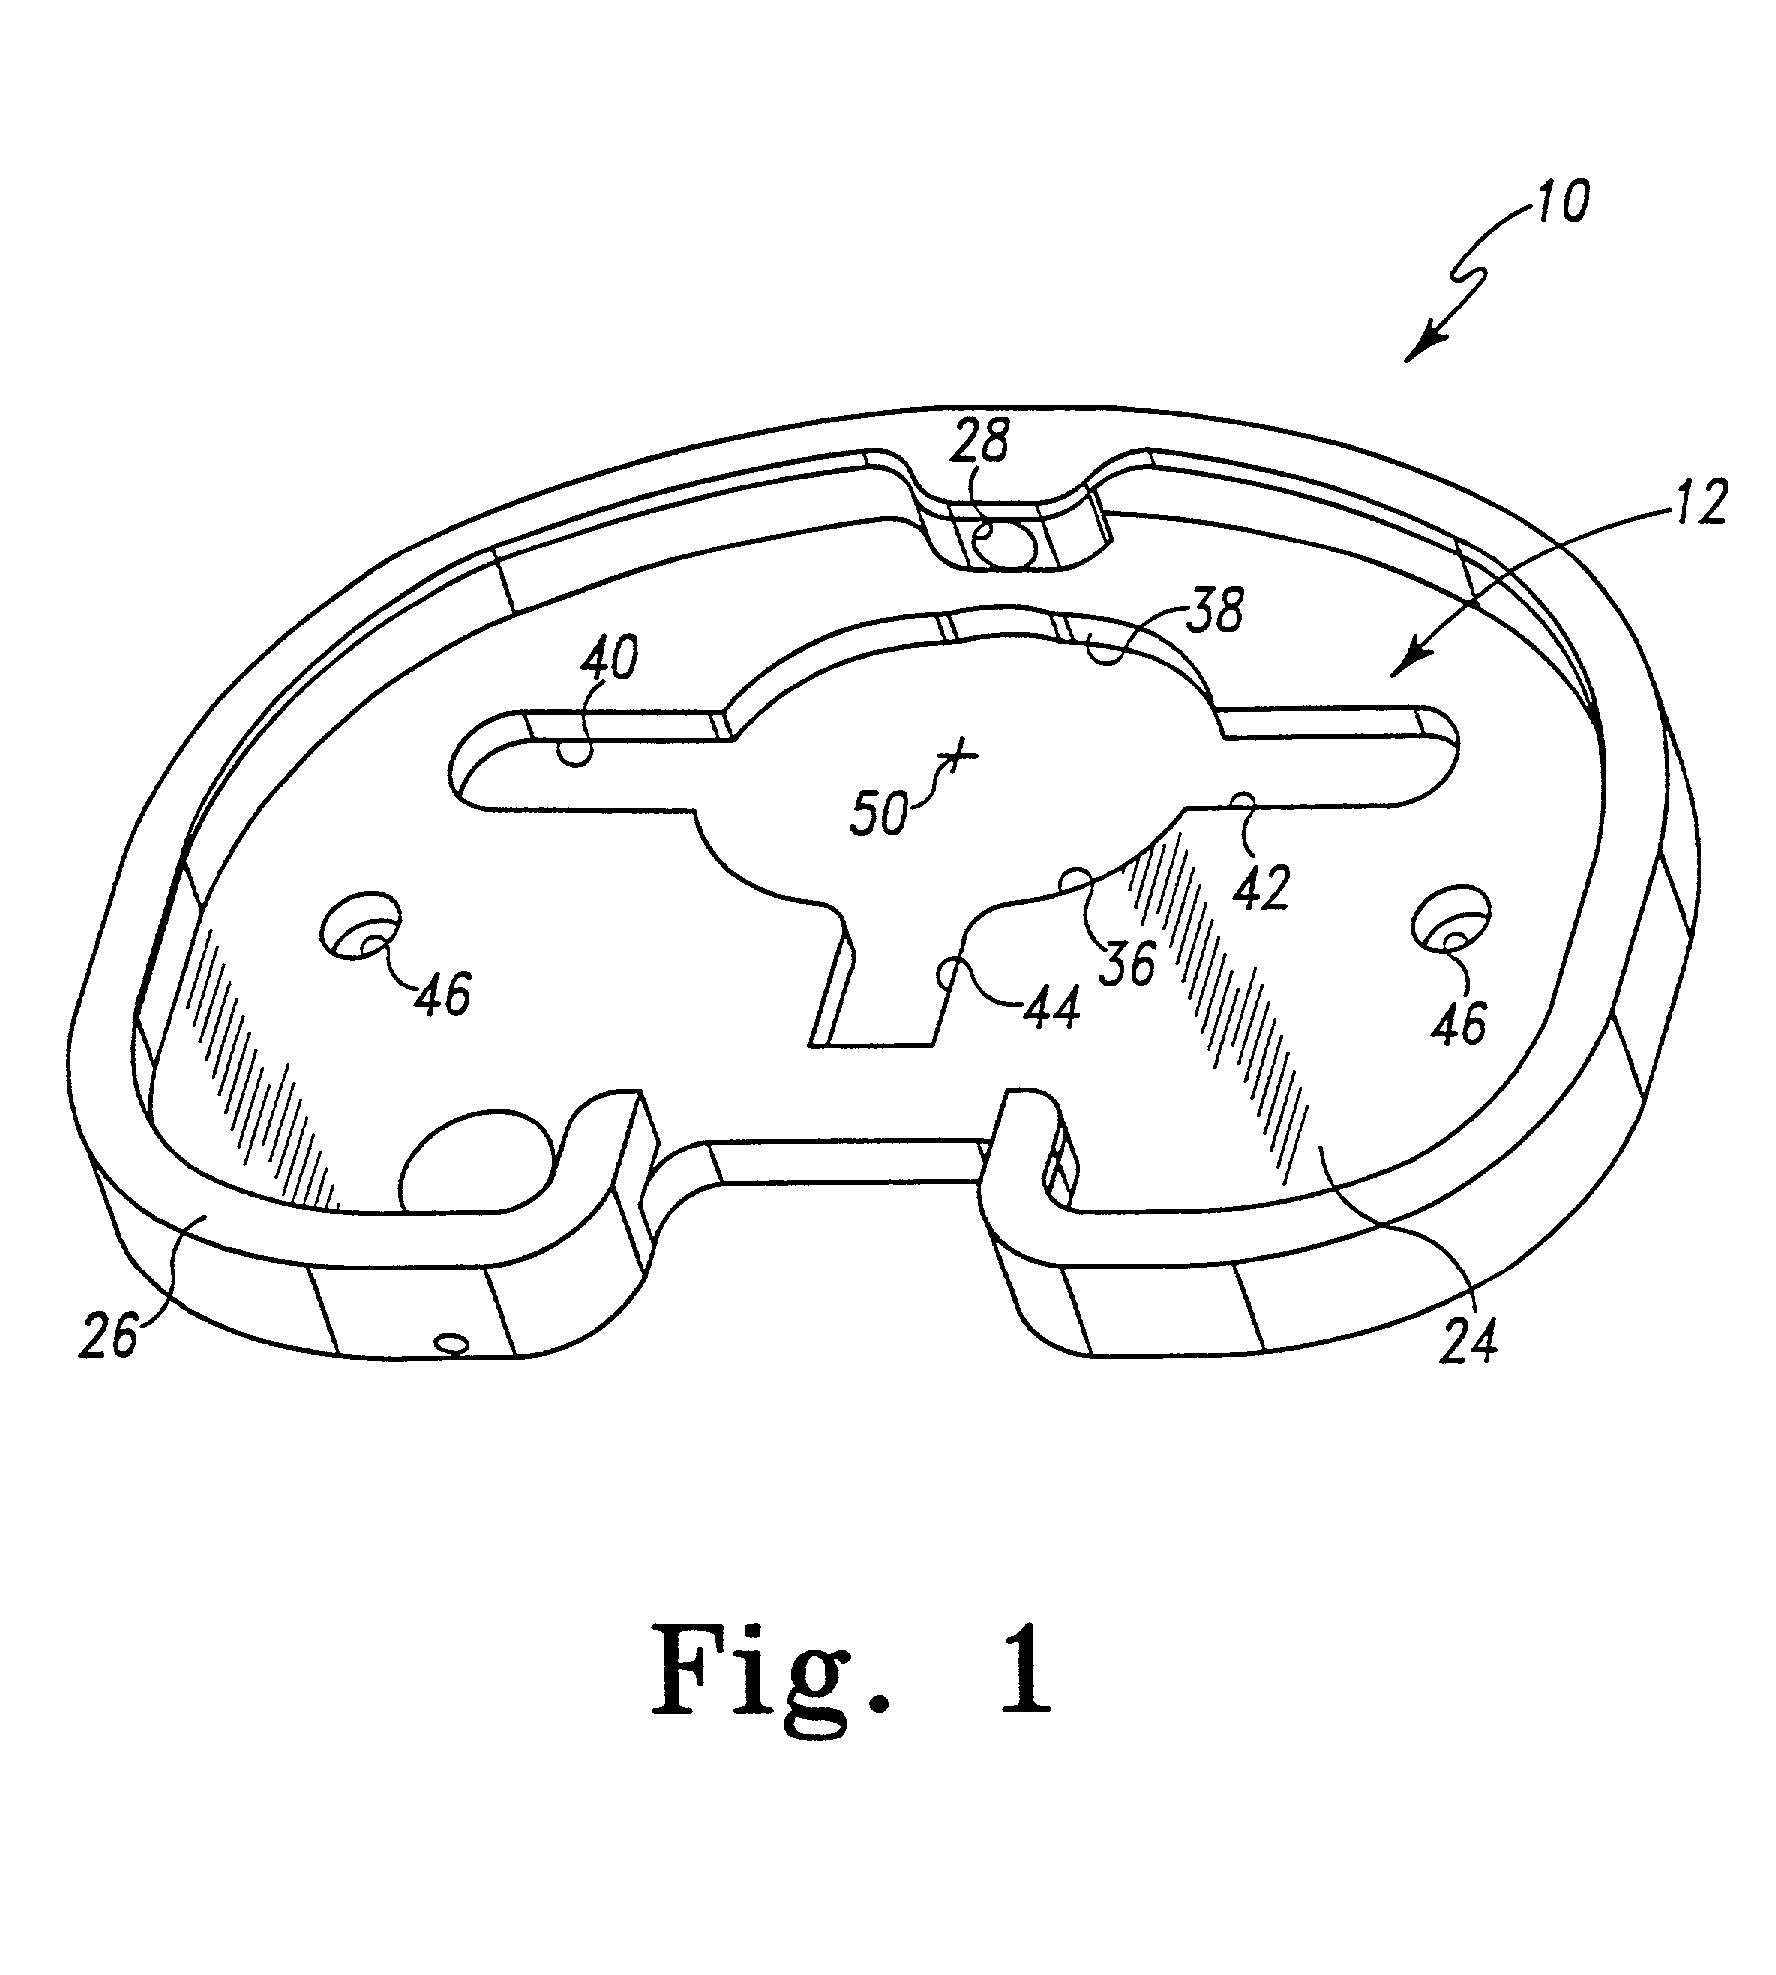 Method and apparatus for surgically preparing a tibia for implantation of a prosthetic implant component which has an offset stem